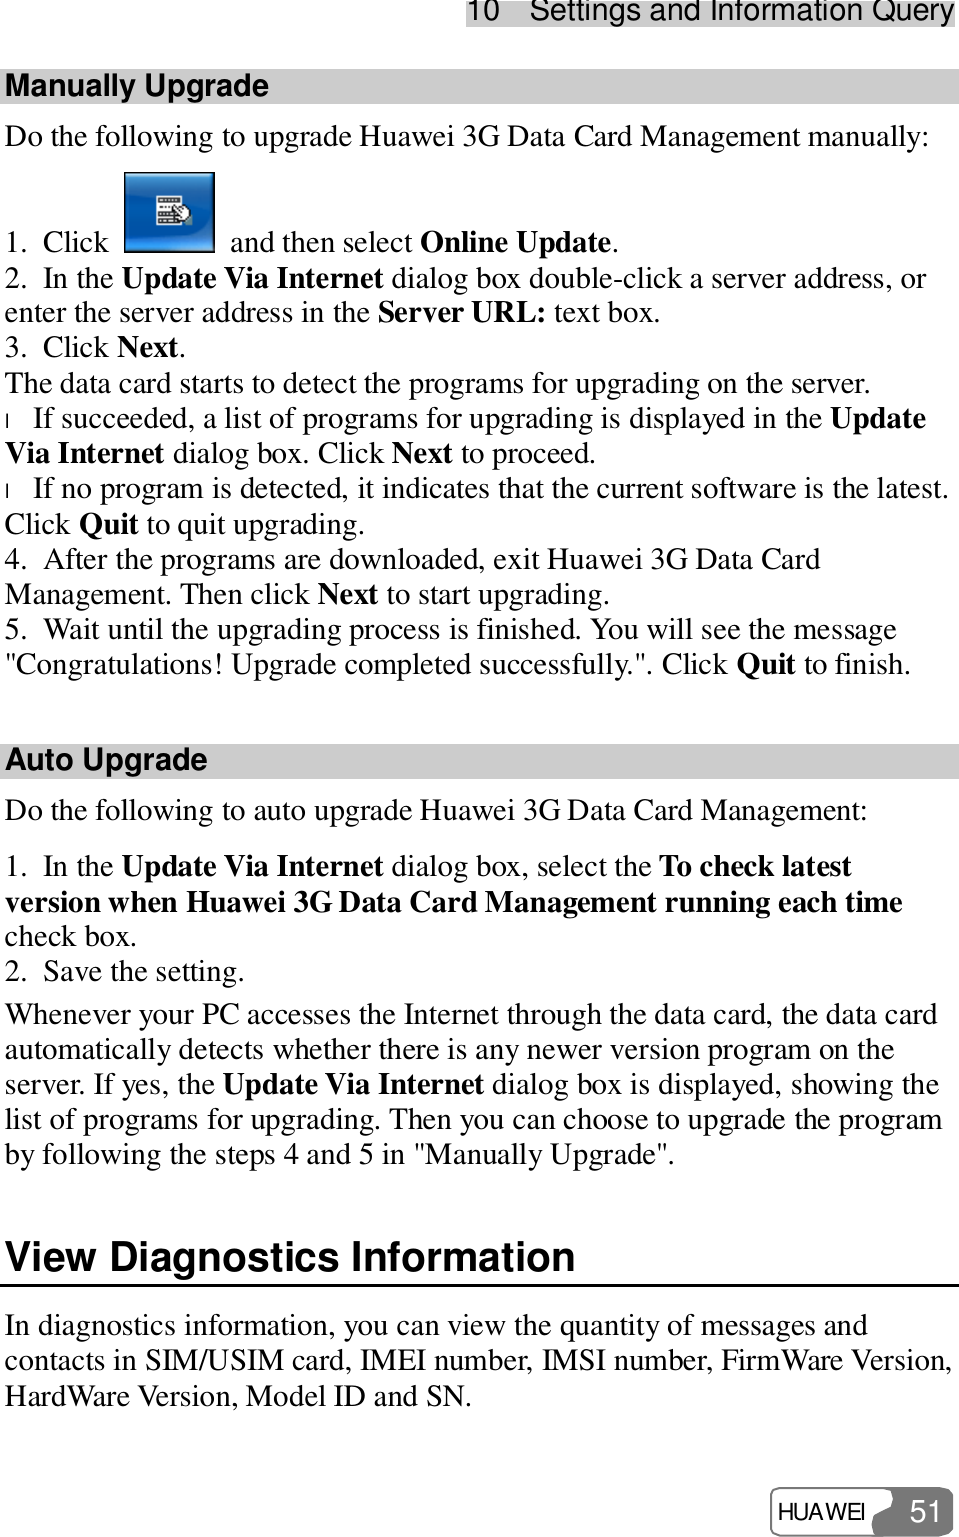 10  Settings and Information Query HUAWEI  51 Manually Upgrade Do the following to upgrade Huawei 3G Data Card Management manually: 1. Click   and then select Online Update. 2. In the Update Via Internet dialog box double-click a server address, or enter the server address in the Server URL: text box. 3. Click Next. The data card starts to detect the programs for upgrading on the server. l If succeeded, a list of programs for upgrading is displayed in the Update Via Internet dialog box. Click Next to proceed. l If no program is detected, it indicates that the current software is the latest. Click Quit to quit upgrading. 4. After the programs are downloaded, exit Huawei 3G Data Card Management. Then click Next to start upgrading. 5. Wait until the upgrading process is finished. You will see the message &quot;Congratulations! Upgrade completed successfully.&quot;. Click Quit to finish. Auto Upgrade Do the following to auto upgrade Huawei 3G Data Card Management: 1. In the Update Via Internet dialog box, select the To check latest version when Huawei 3G Data Card Management running each time check box. 2. Save the setting. Whenever your PC accesses the Internet through the data card, the data card automatically detects whether there is any newer version program on the server. If yes, the Update Via Internet dialog box is displayed, showing the list of programs for upgrading. Then you can choose to upgrade the program by following the steps 4 and 5 in &quot;Manually Upgrade&quot;. View Diagnostics Information In diagnostics information, you can view the quantity of messages and contacts in SIM/USIM card, IMEI number, IMSI number, FirmWare Version, HardWare Version, Model ID and SN. 